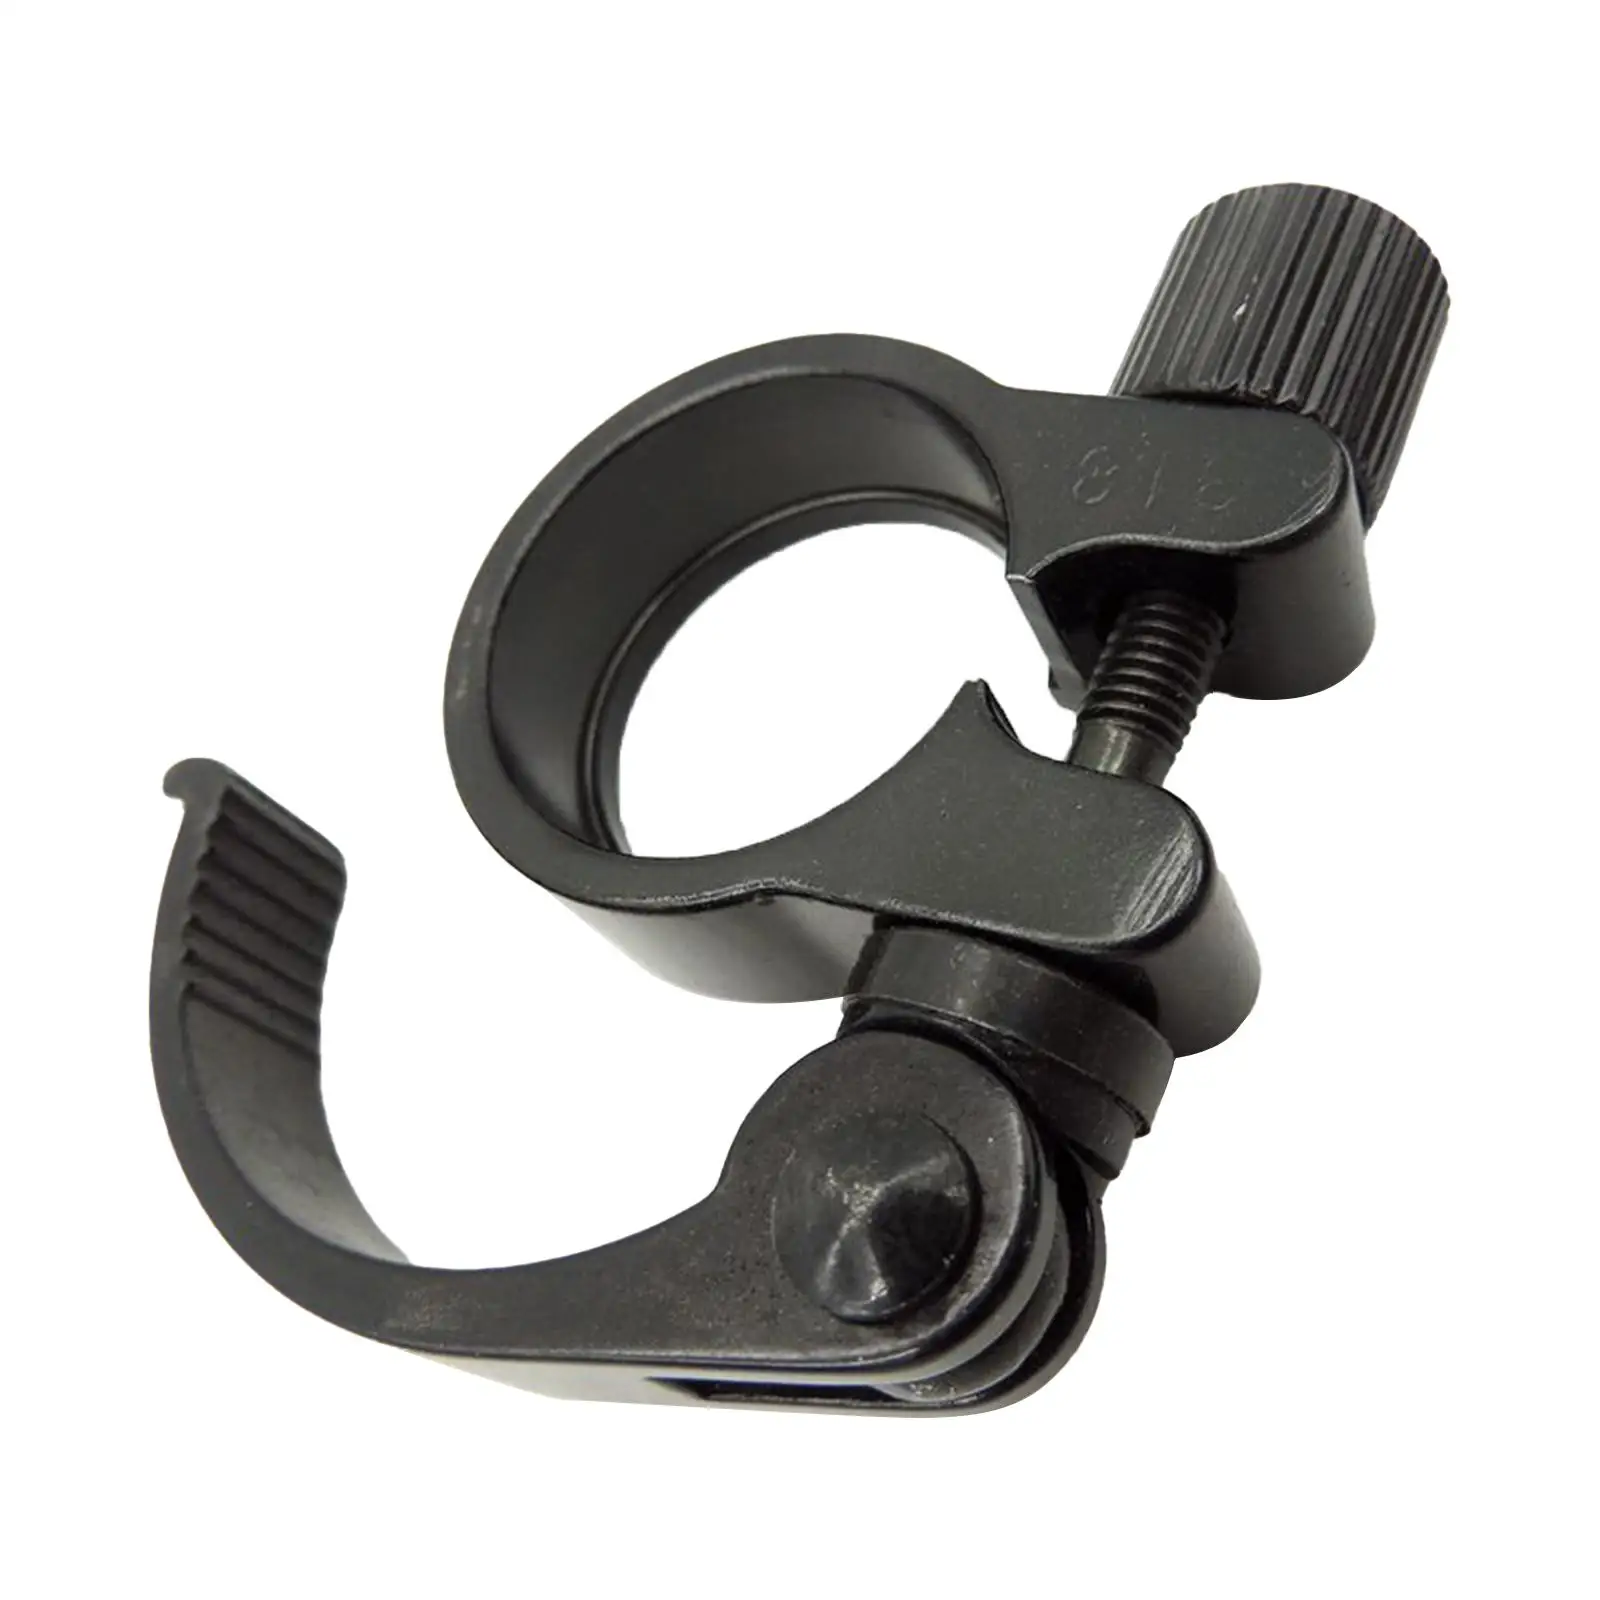 Bicycle Seat Tube Mount Clip Premium Universal Bicycle Seatpost Clamp Quick Release Bike Seat Tube Clamp for Road Bicycle Parts